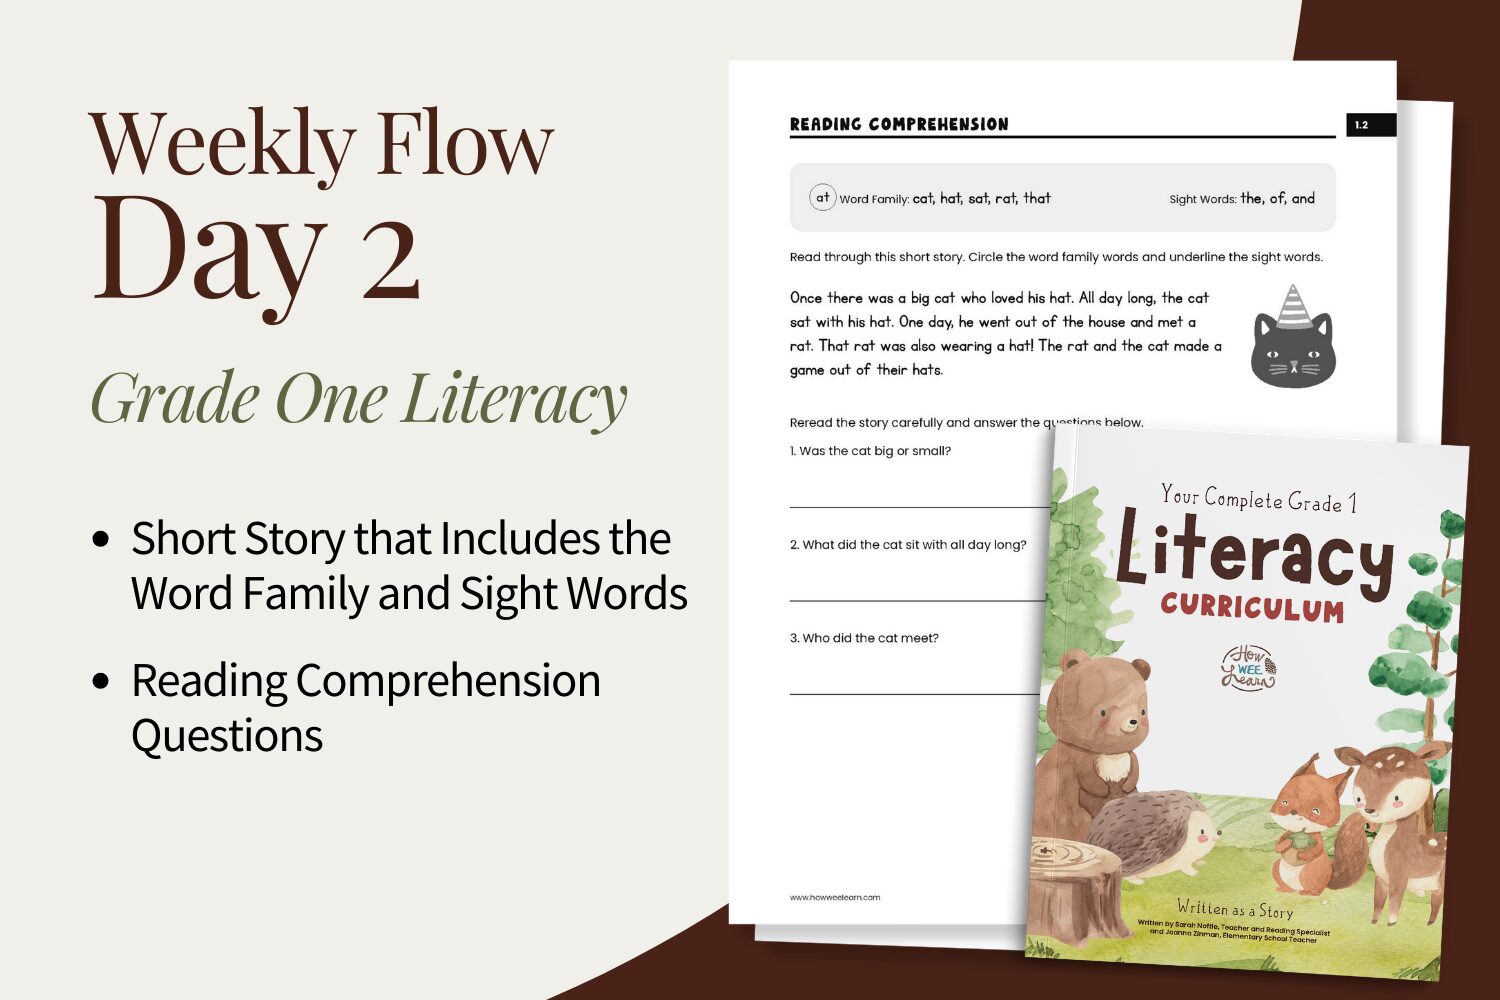 Grade One Literacy: Weekly Flow, Day 2 - Short Story that Includes the Word Family and Sight Words - Reading Comprehension Questions